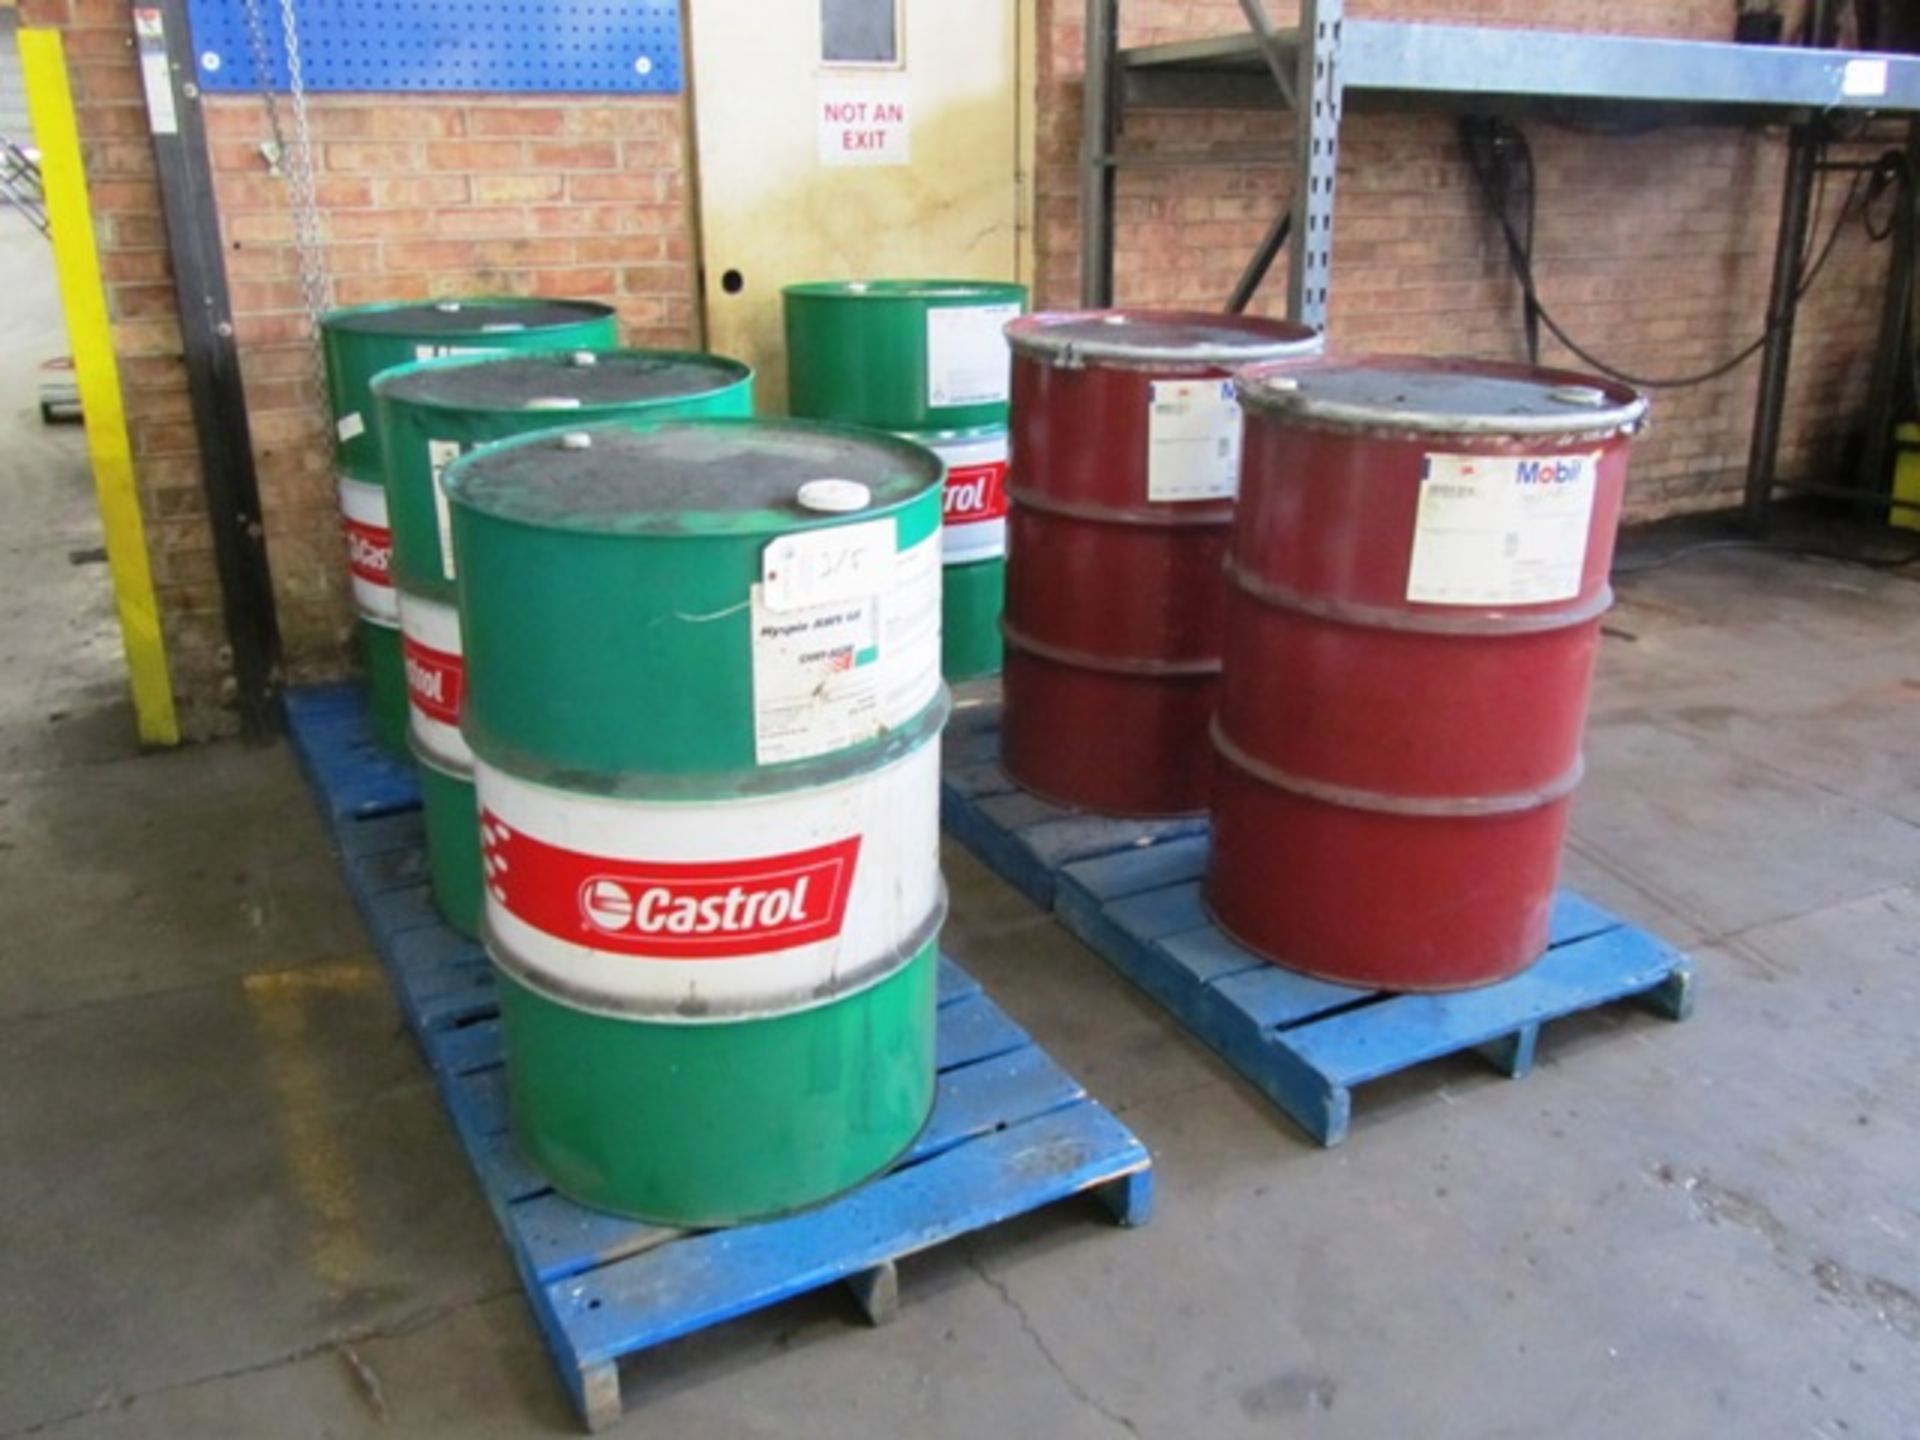 Castrol 12081-AEDR, 11029-AEDR, 12027 Beir Oil, Syntilo 9930, (2) Barrels of Mobile Unirex EP2